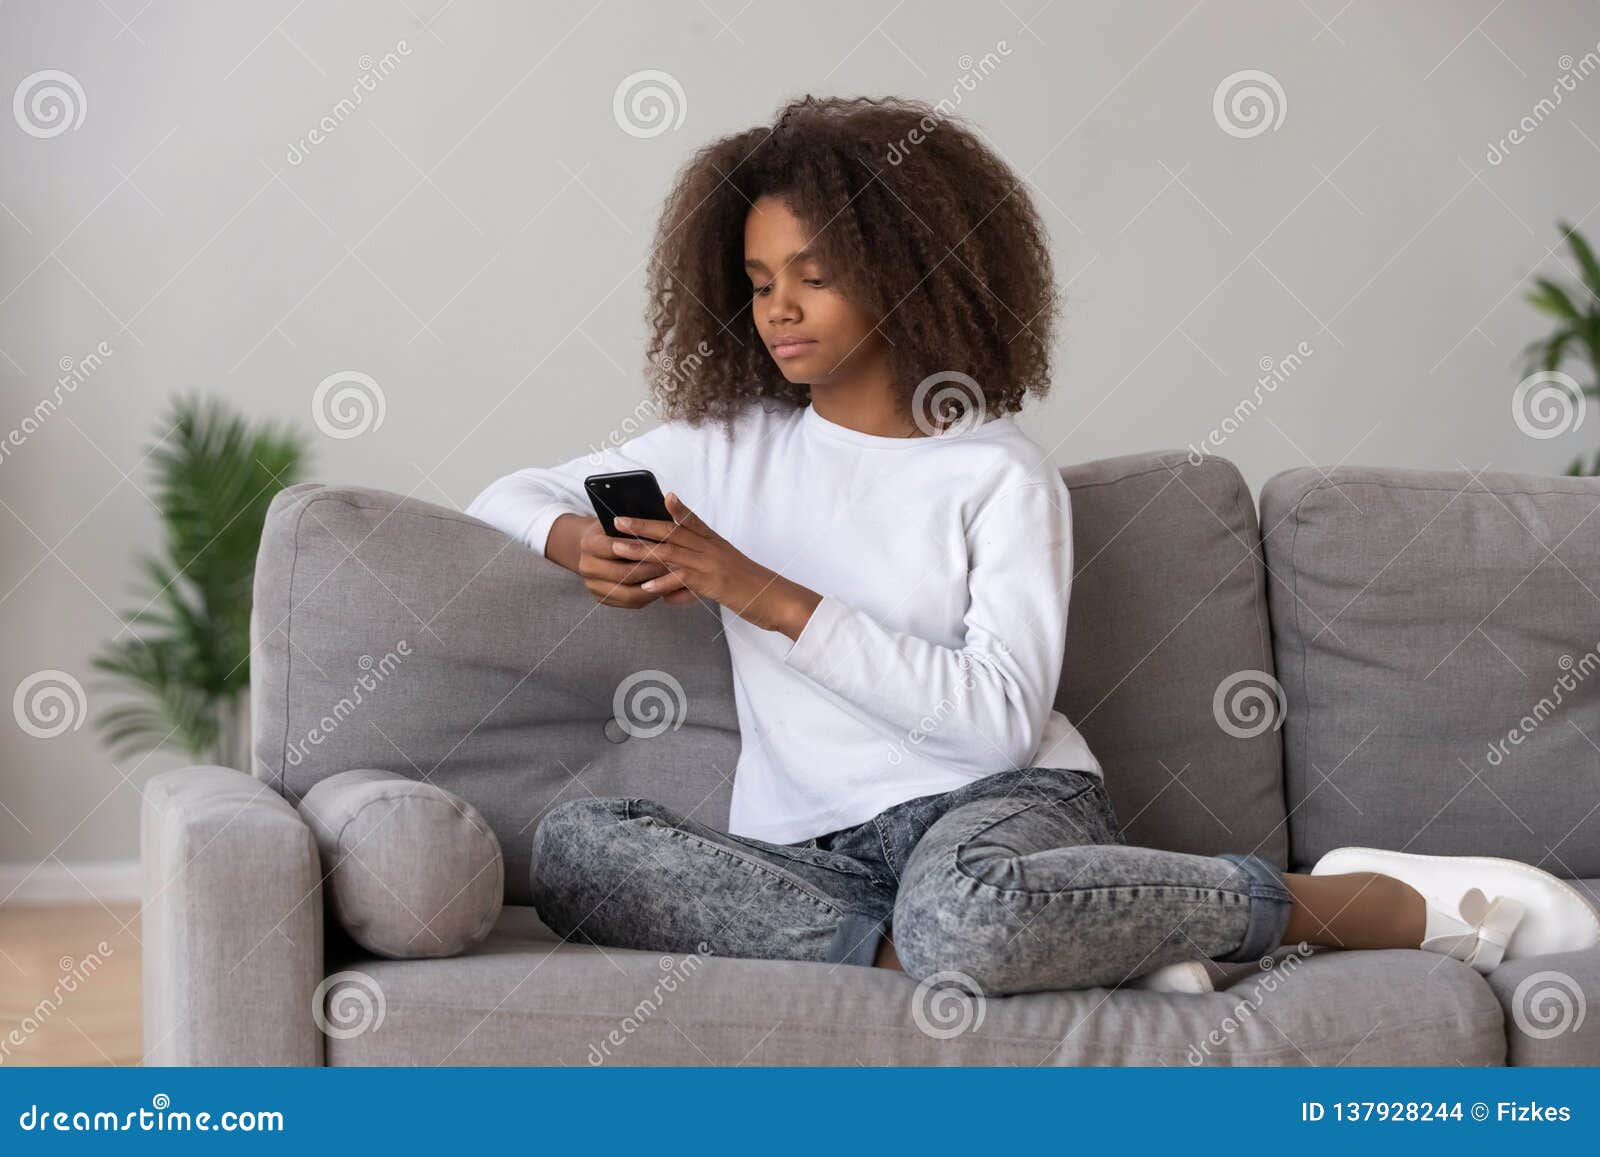 Black Teenage Girl Relax On Couch Using Smartphone Stock Photo